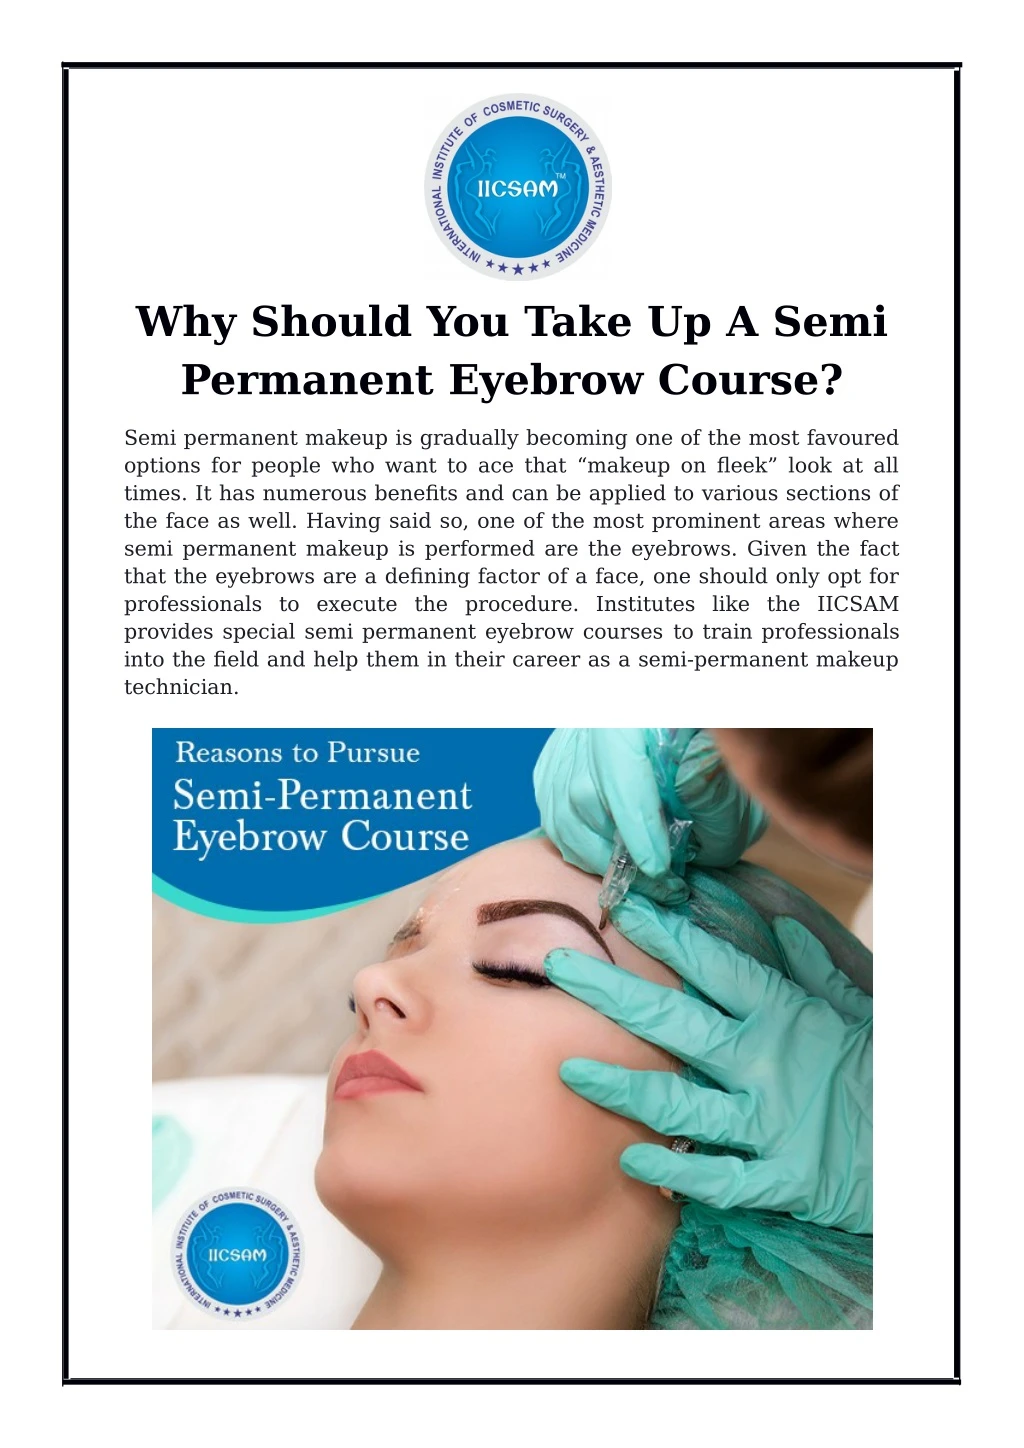 why should you take up a semi permanent eyebrow